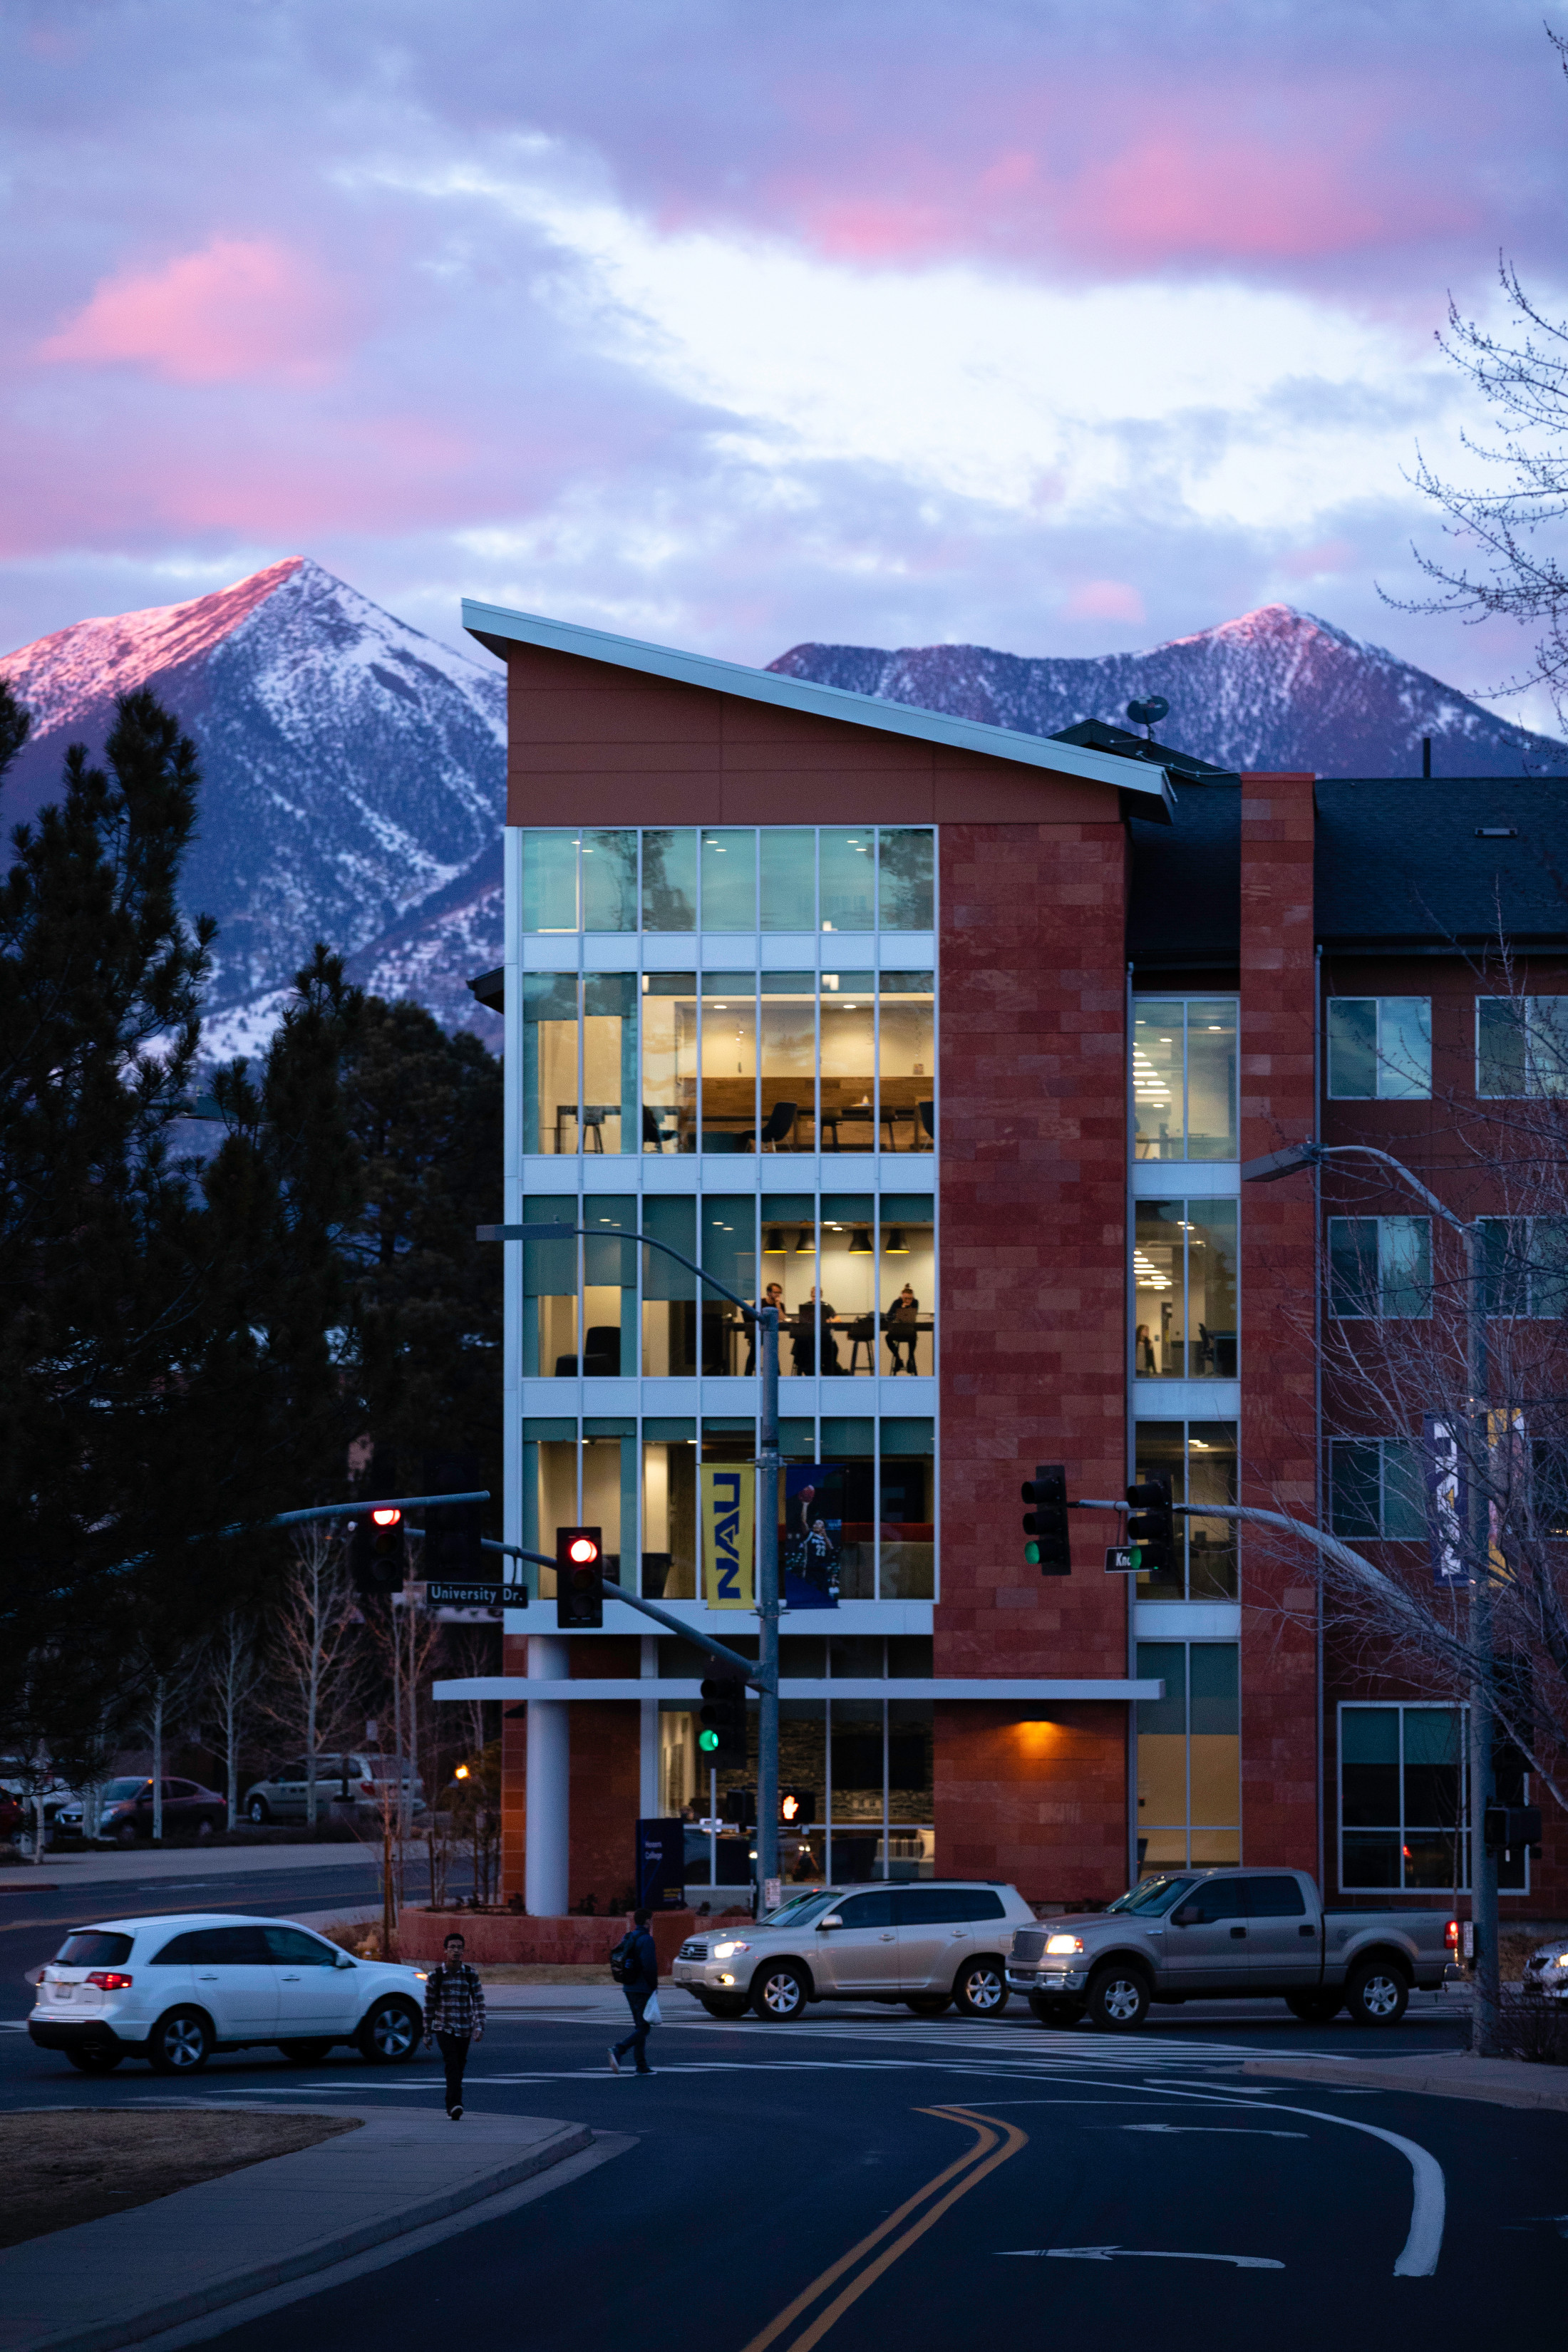 An image of a building on N A U's Flagstaff campus with the snow peaked mountains showing in the background